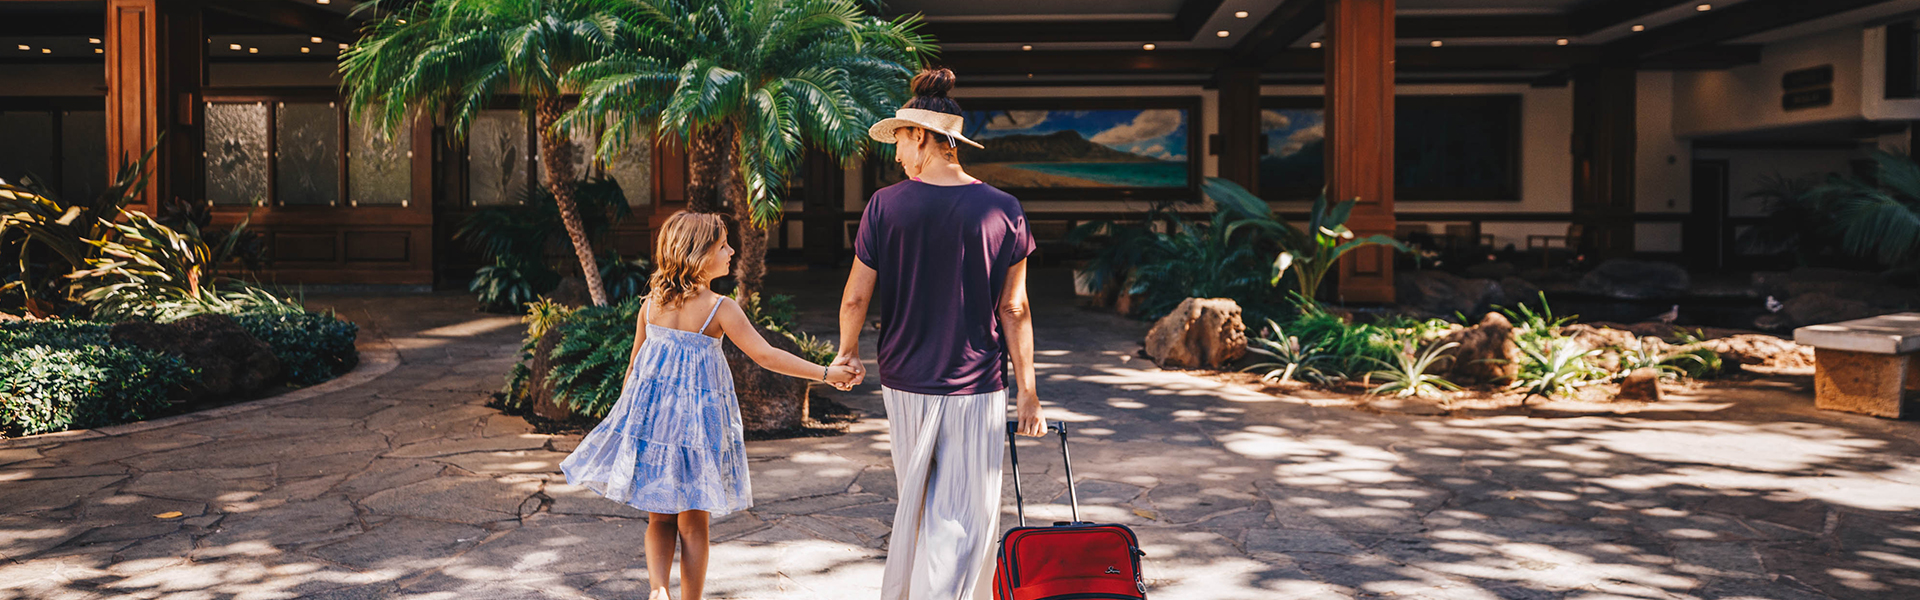 Daughter and mother walking through hotel entrance with luggage